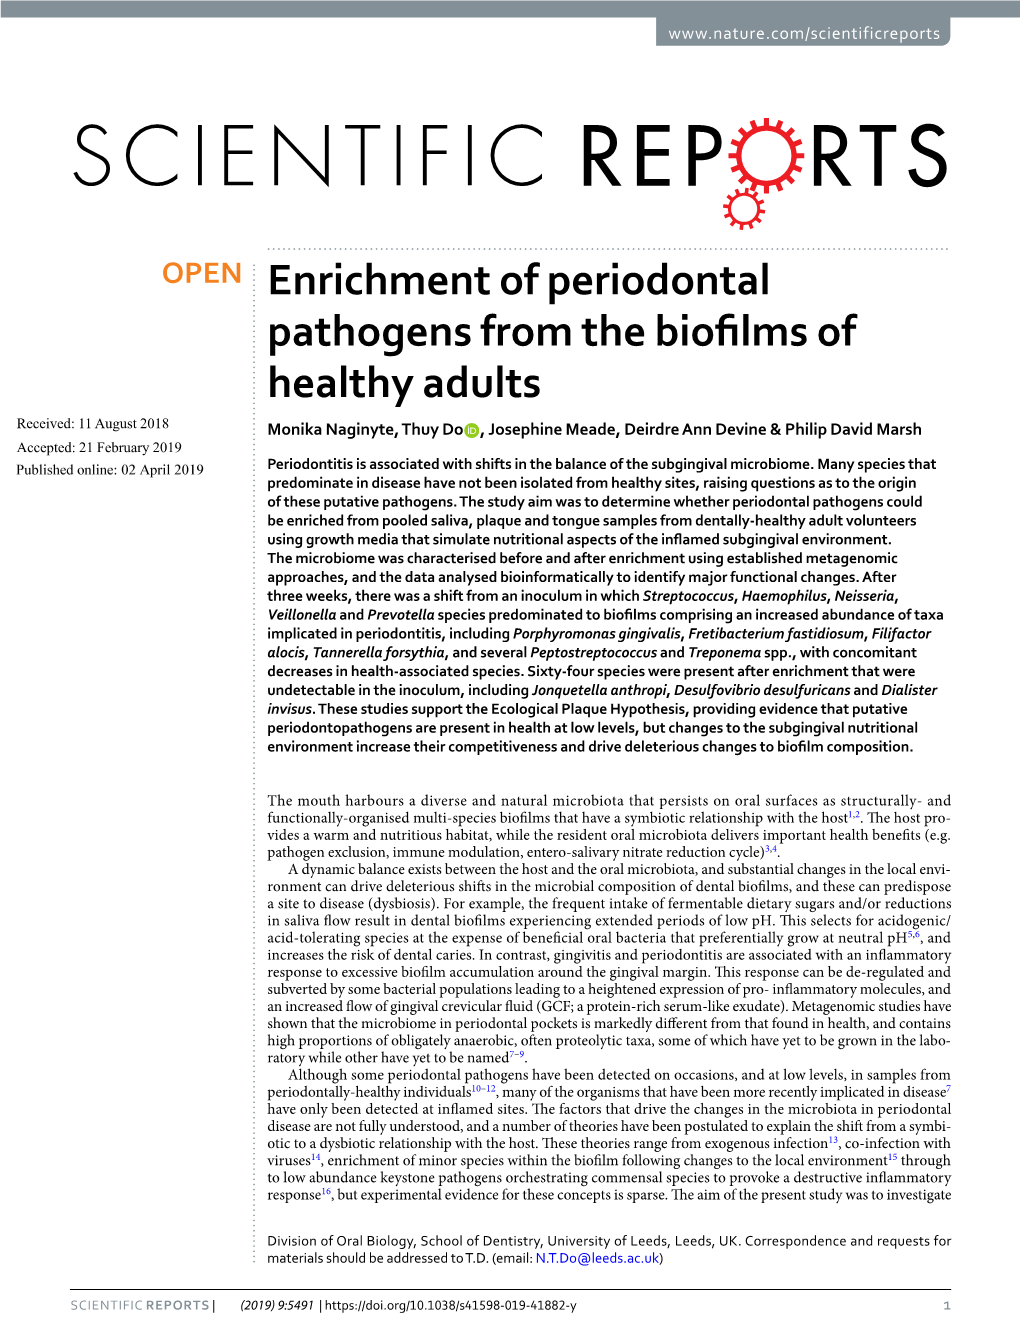 Enrichment of Periodontal Pathogens from the Biofilms of Healthy Adults